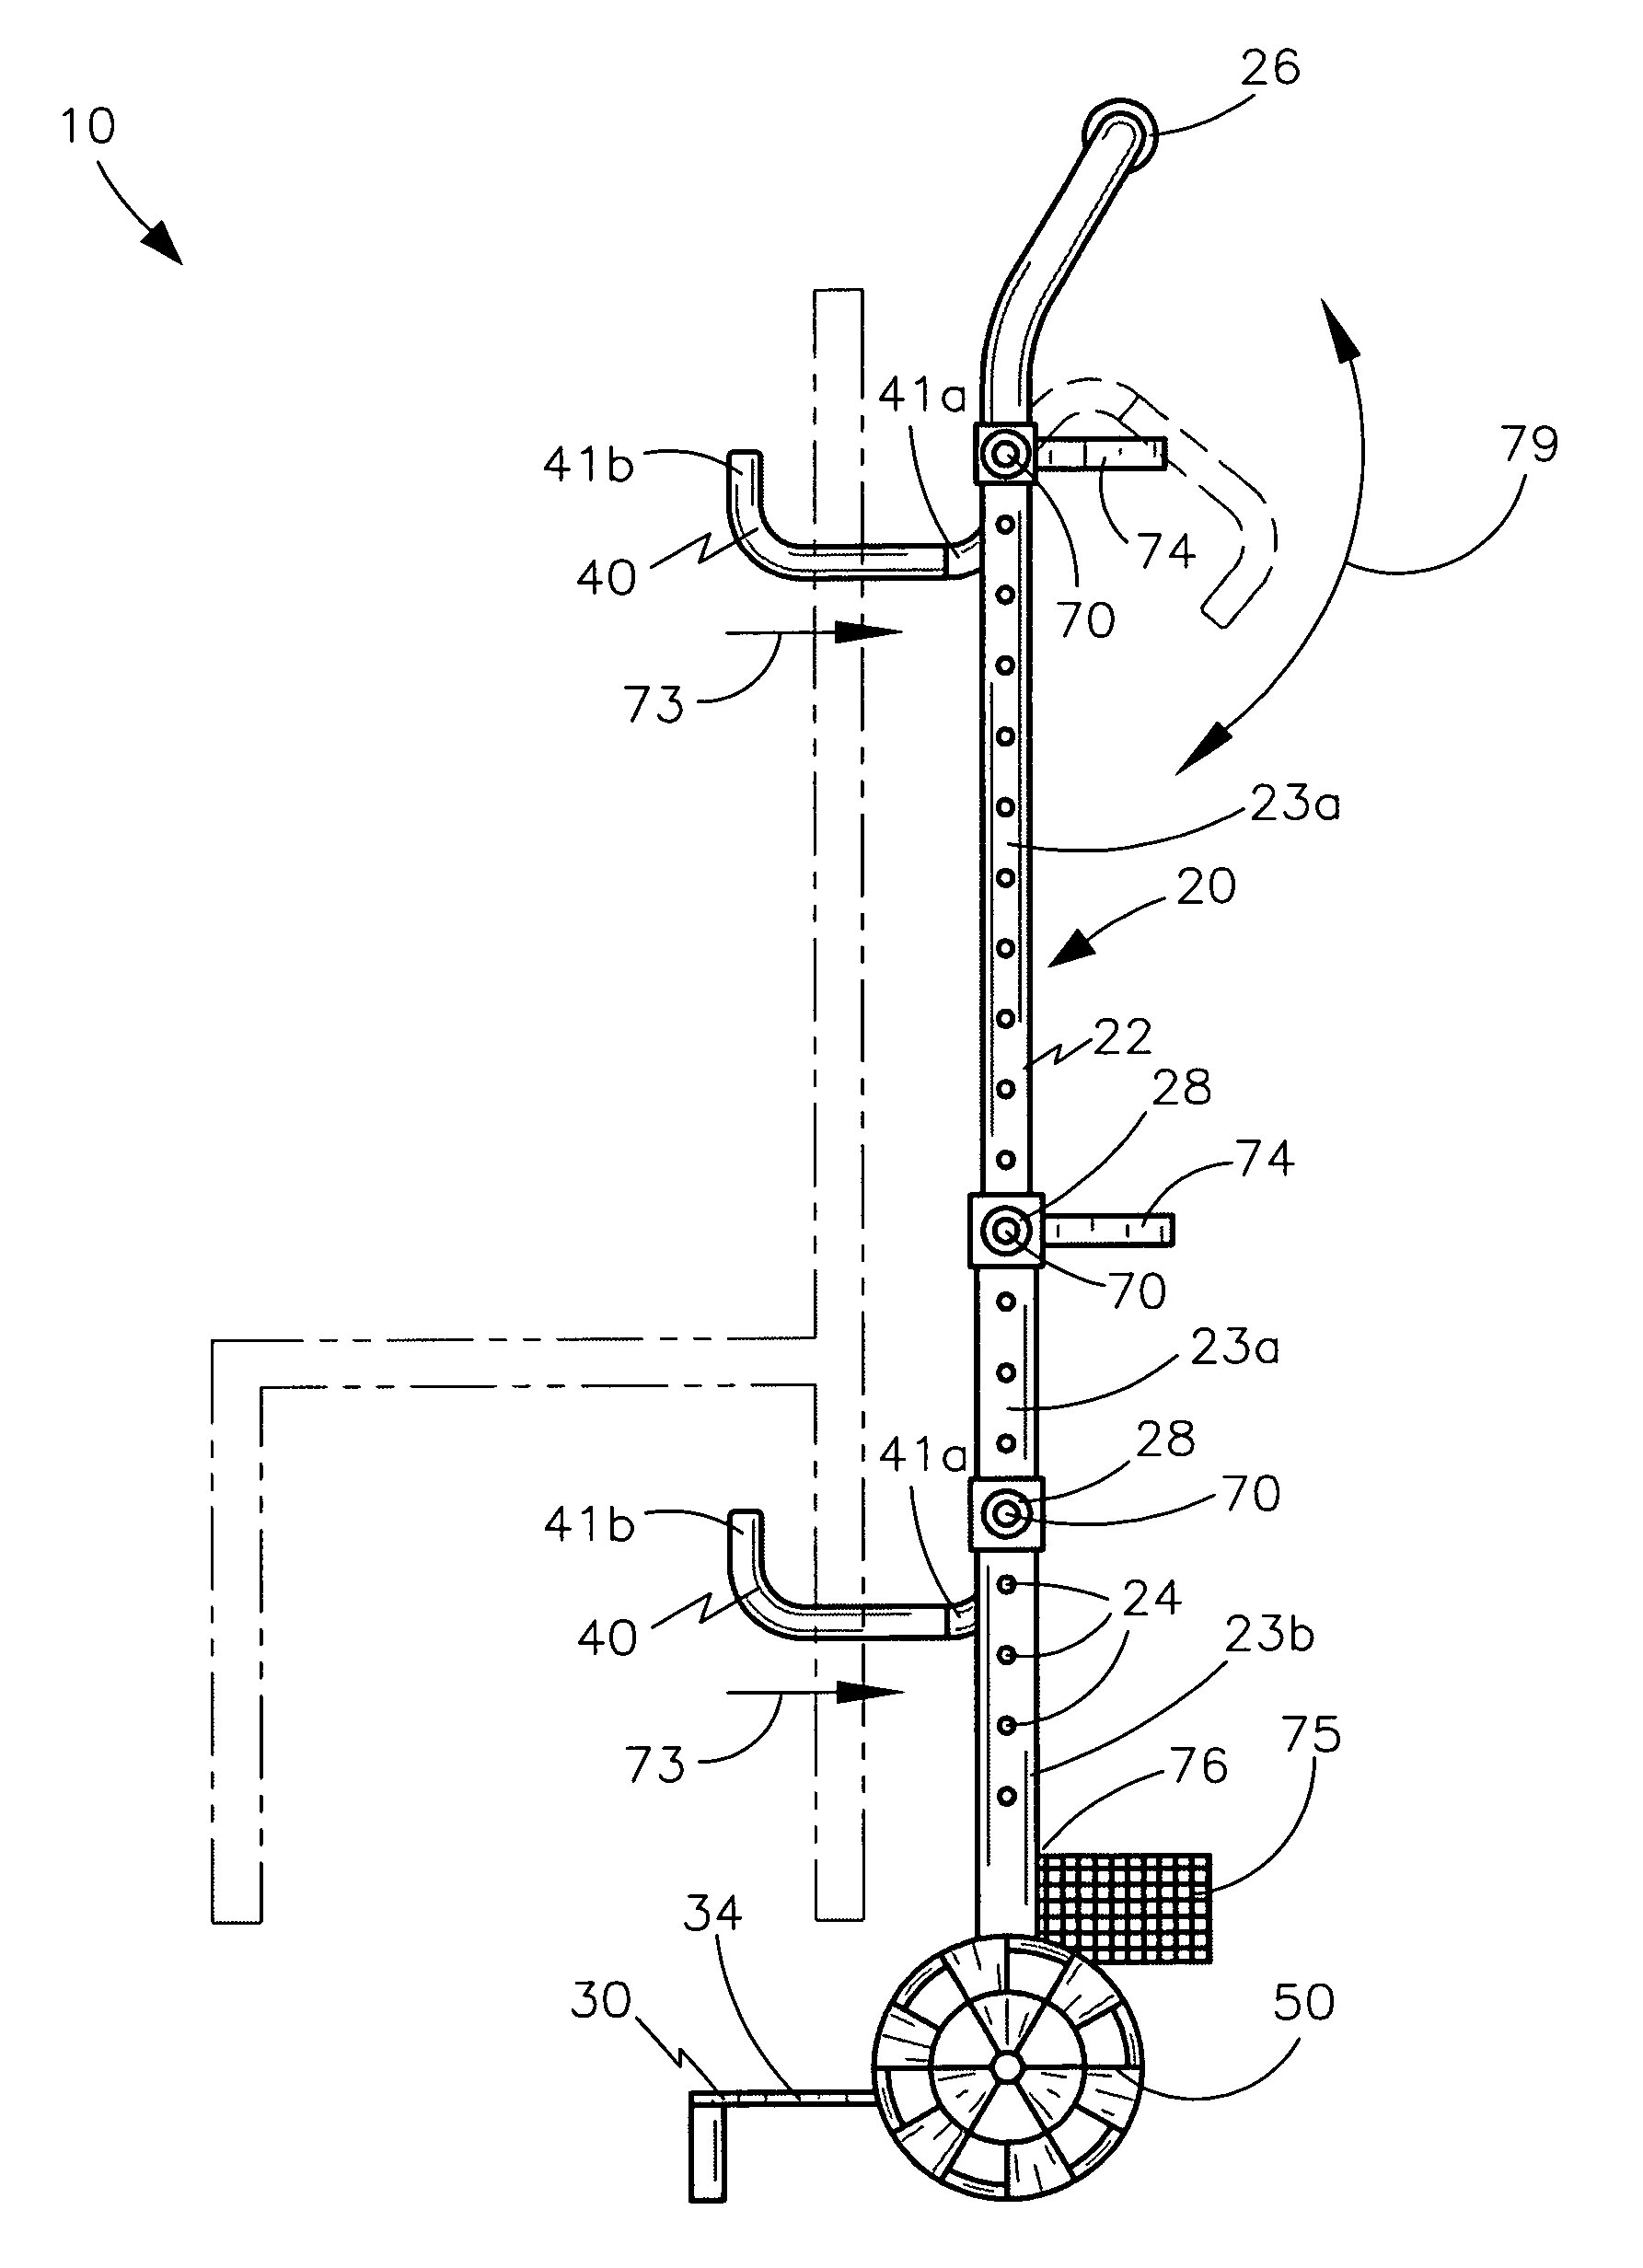 Cart for transporting beach accessories and associated method